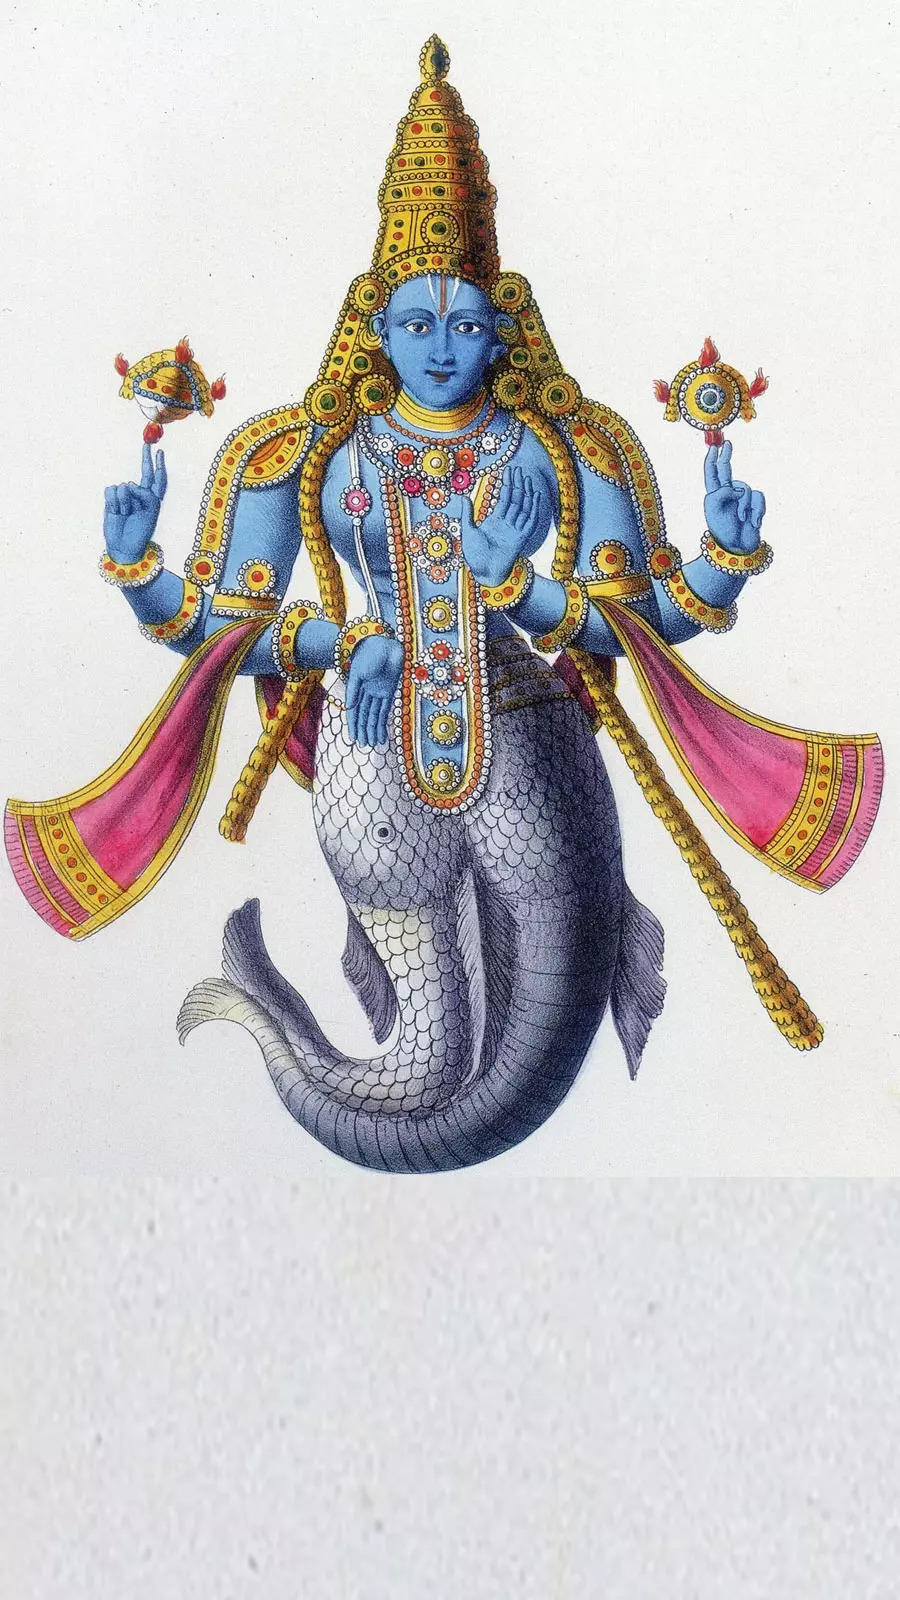 Matsya; Lord Vishnu in his avatar as a fish in order to save the world.  Gouache painting by an Indian artist. | Wellcome Collection